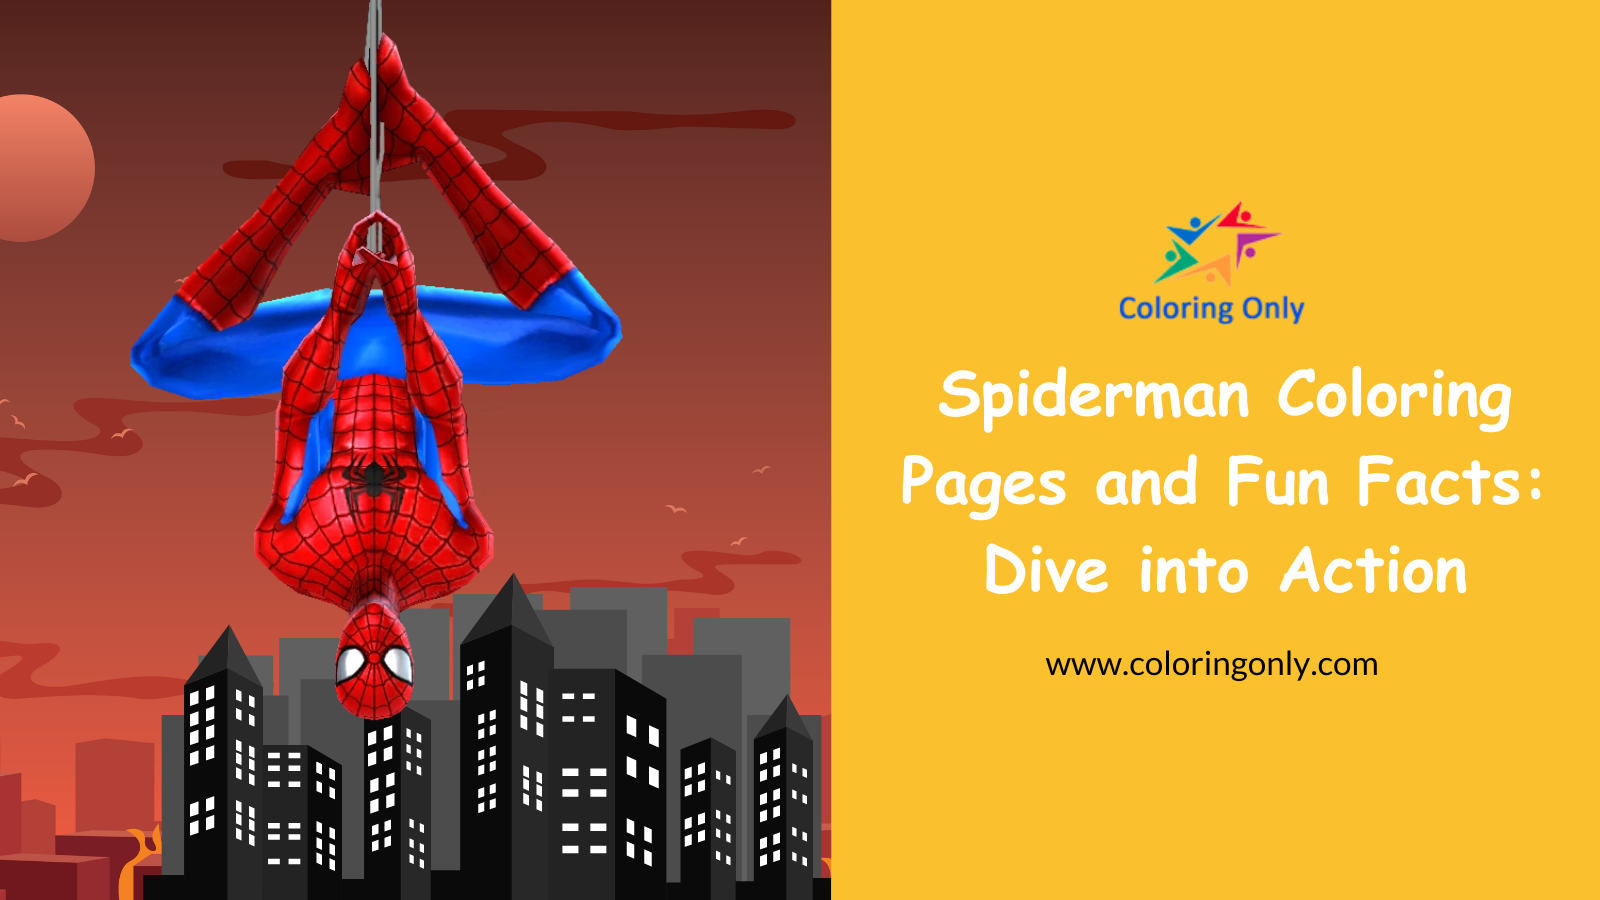 Spiderman Coloring Pages and Fun Facts: Dive into Action